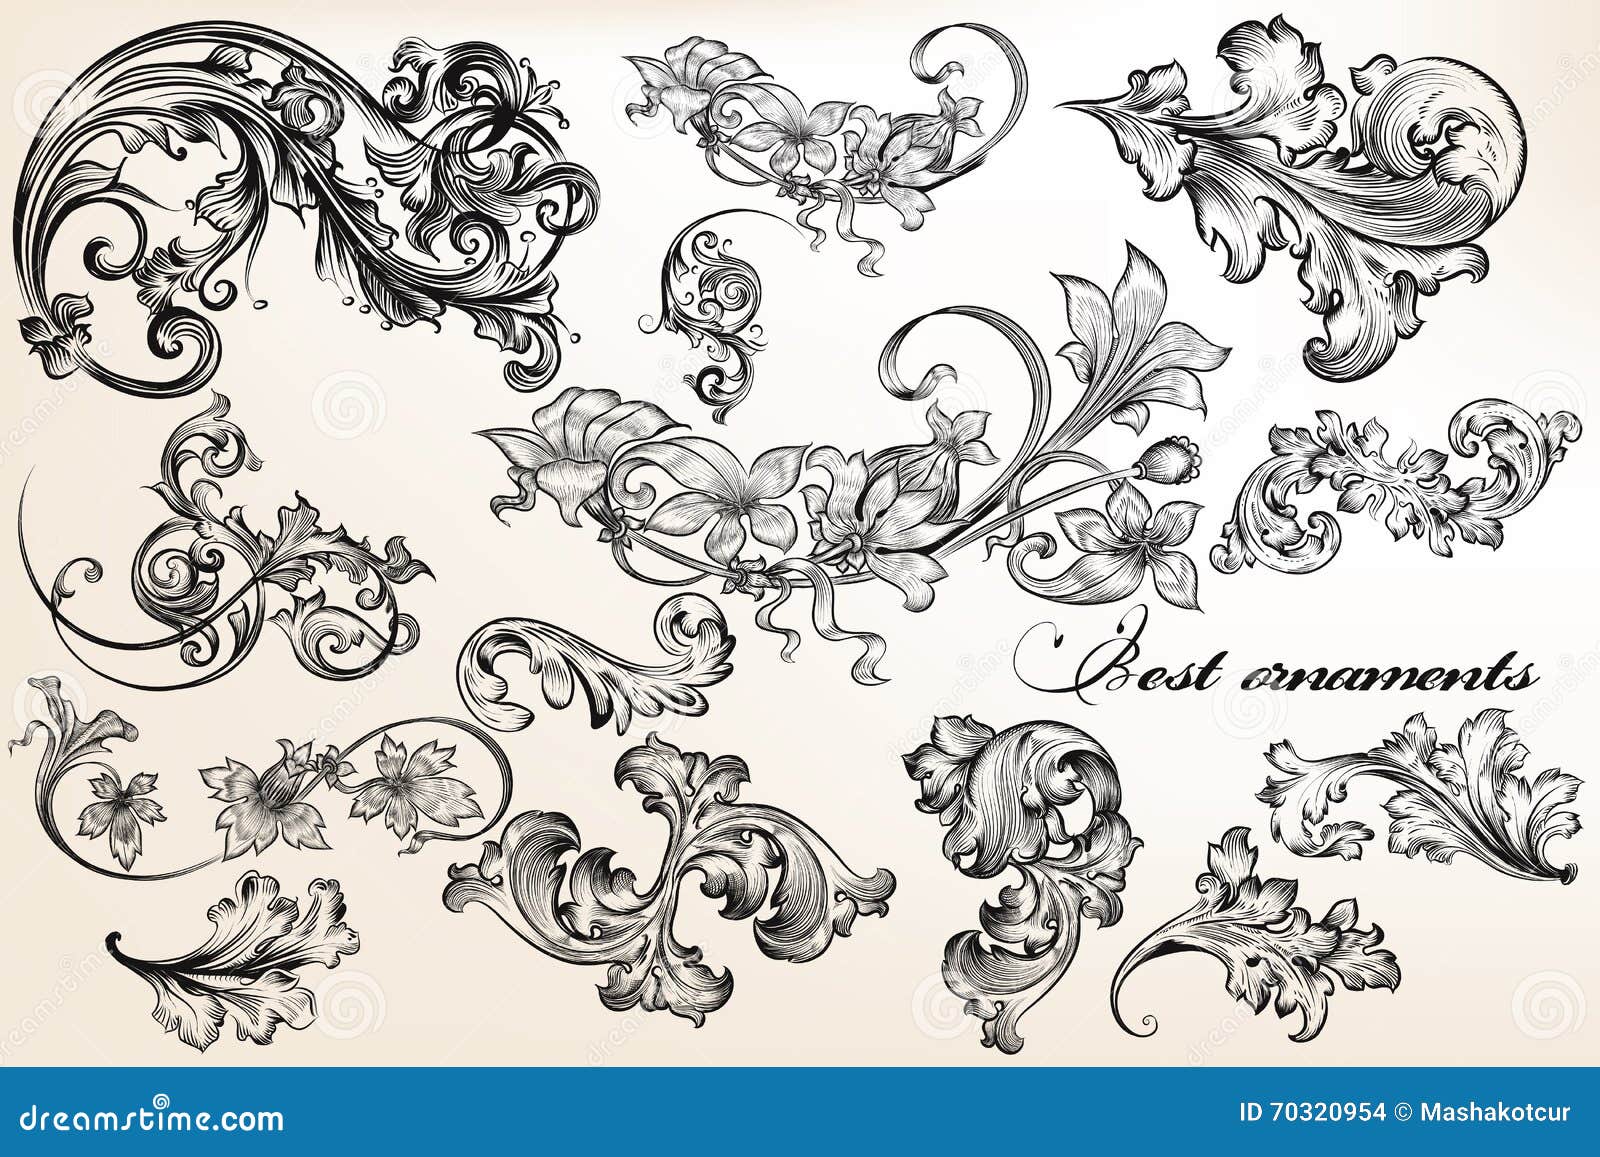 Collection Of Vector Calligraphic Flourishes And Swirls ...